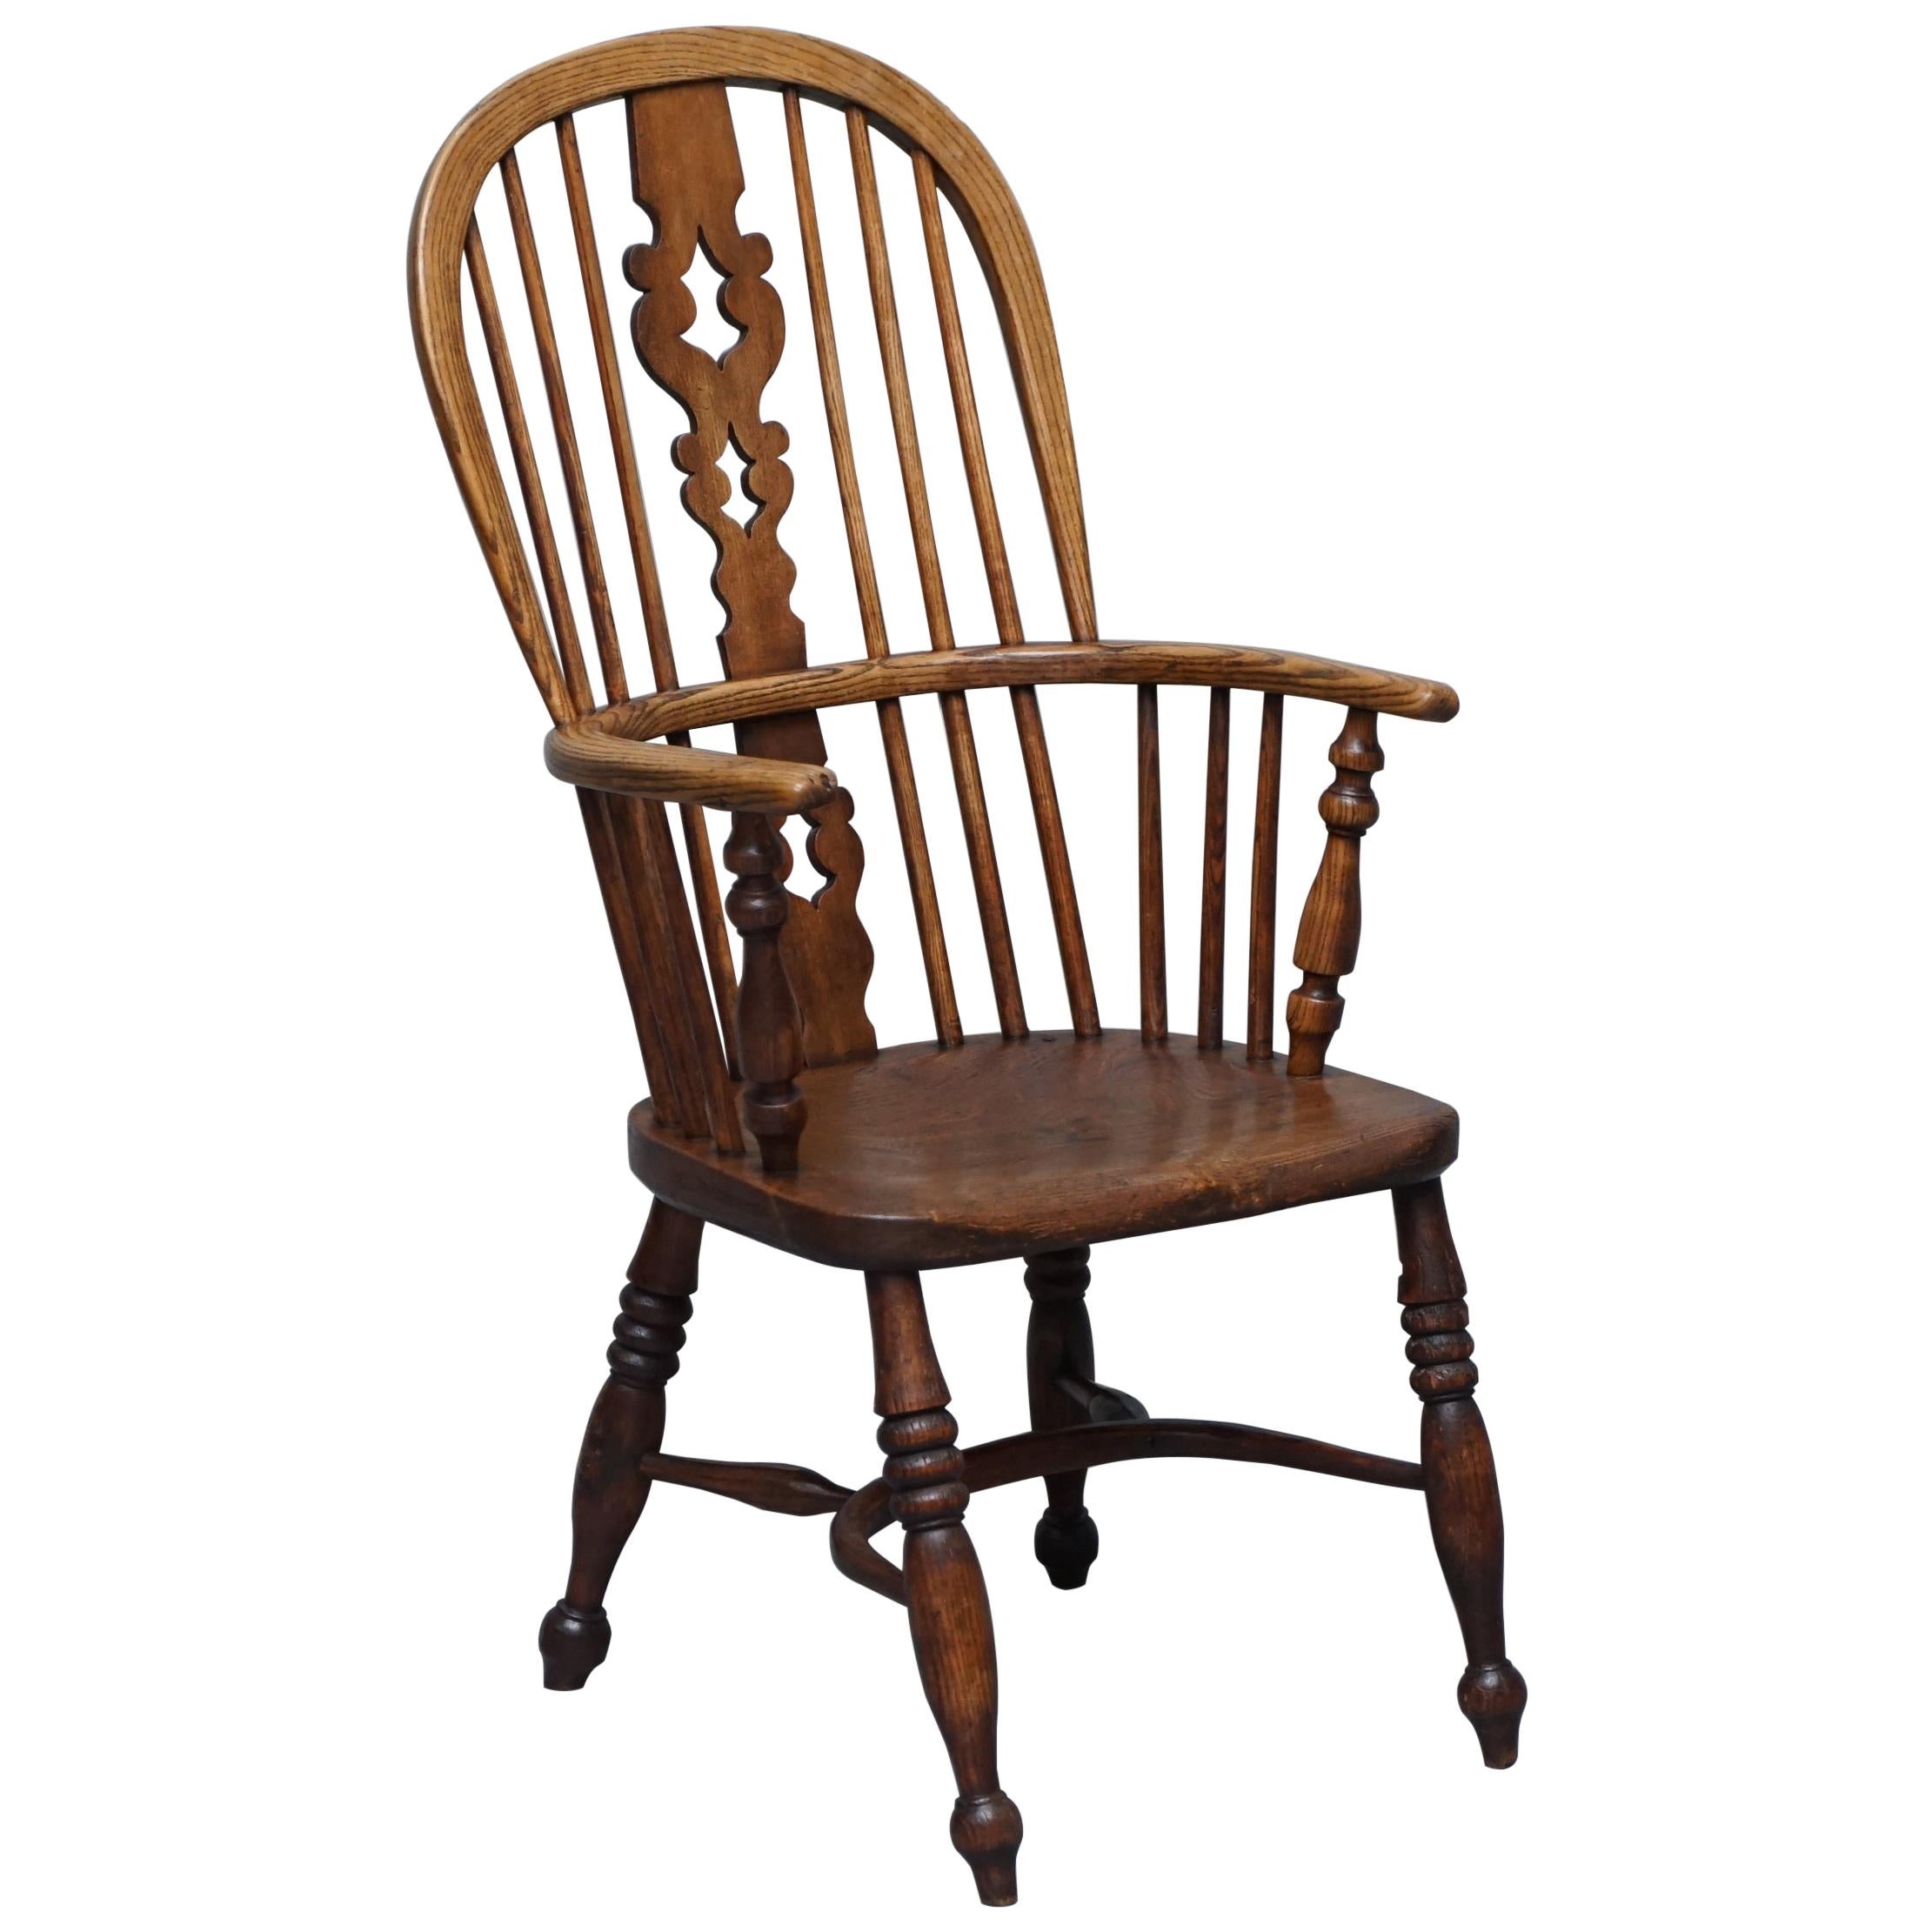 English Classic Antique 19th Century Elm Hoop Back West Country Windsor Armchair For Sale